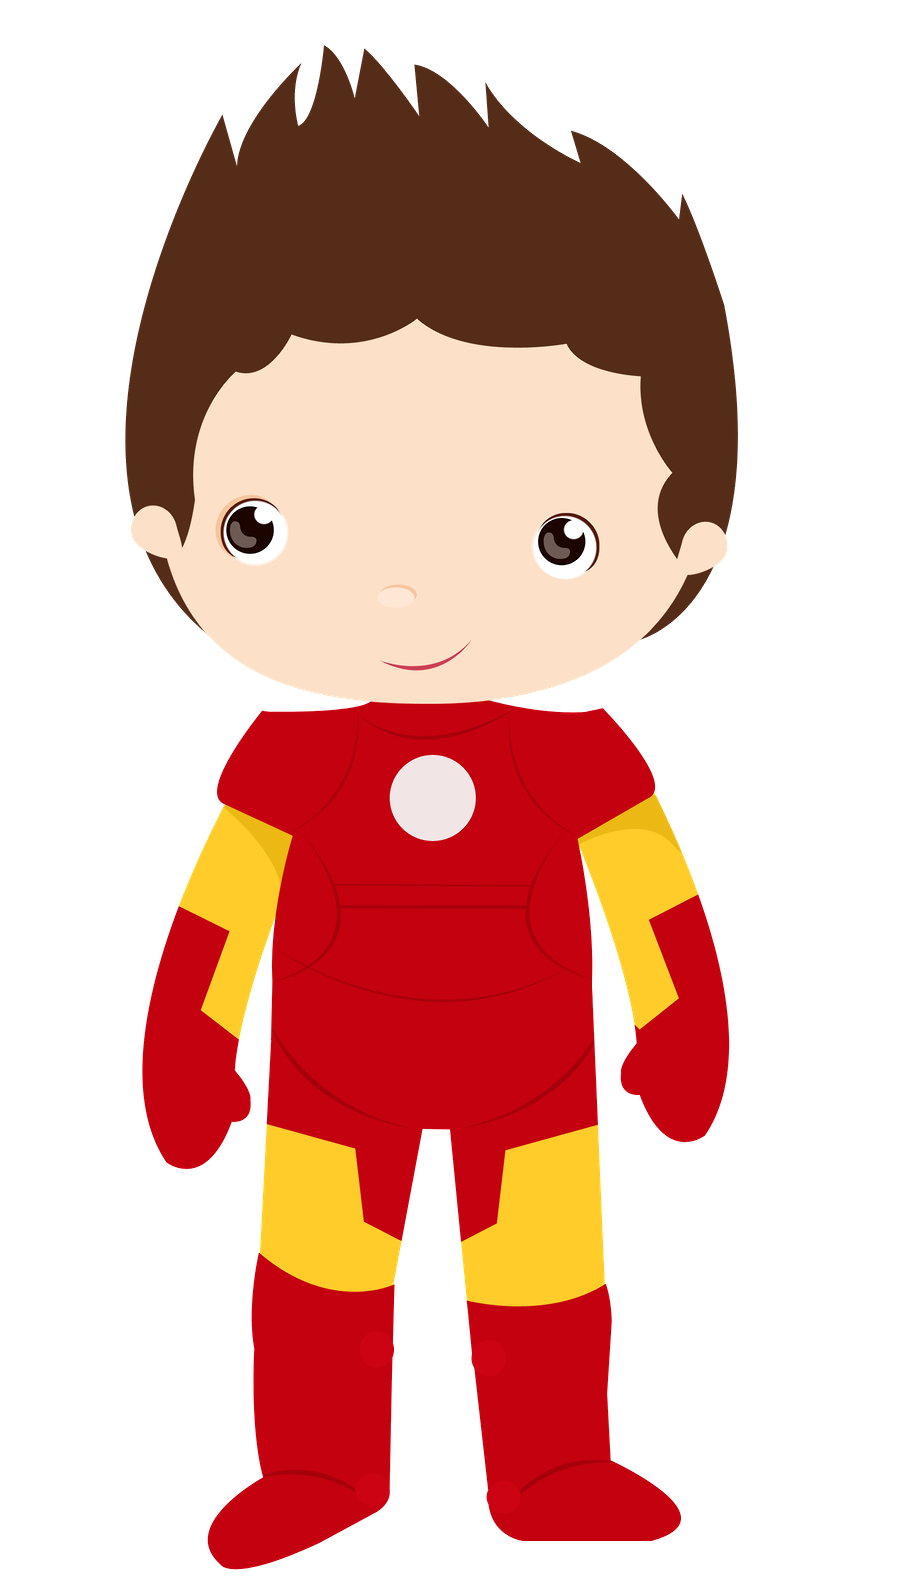 Telephone clipart kid, Telephone kid Transparent FREE for